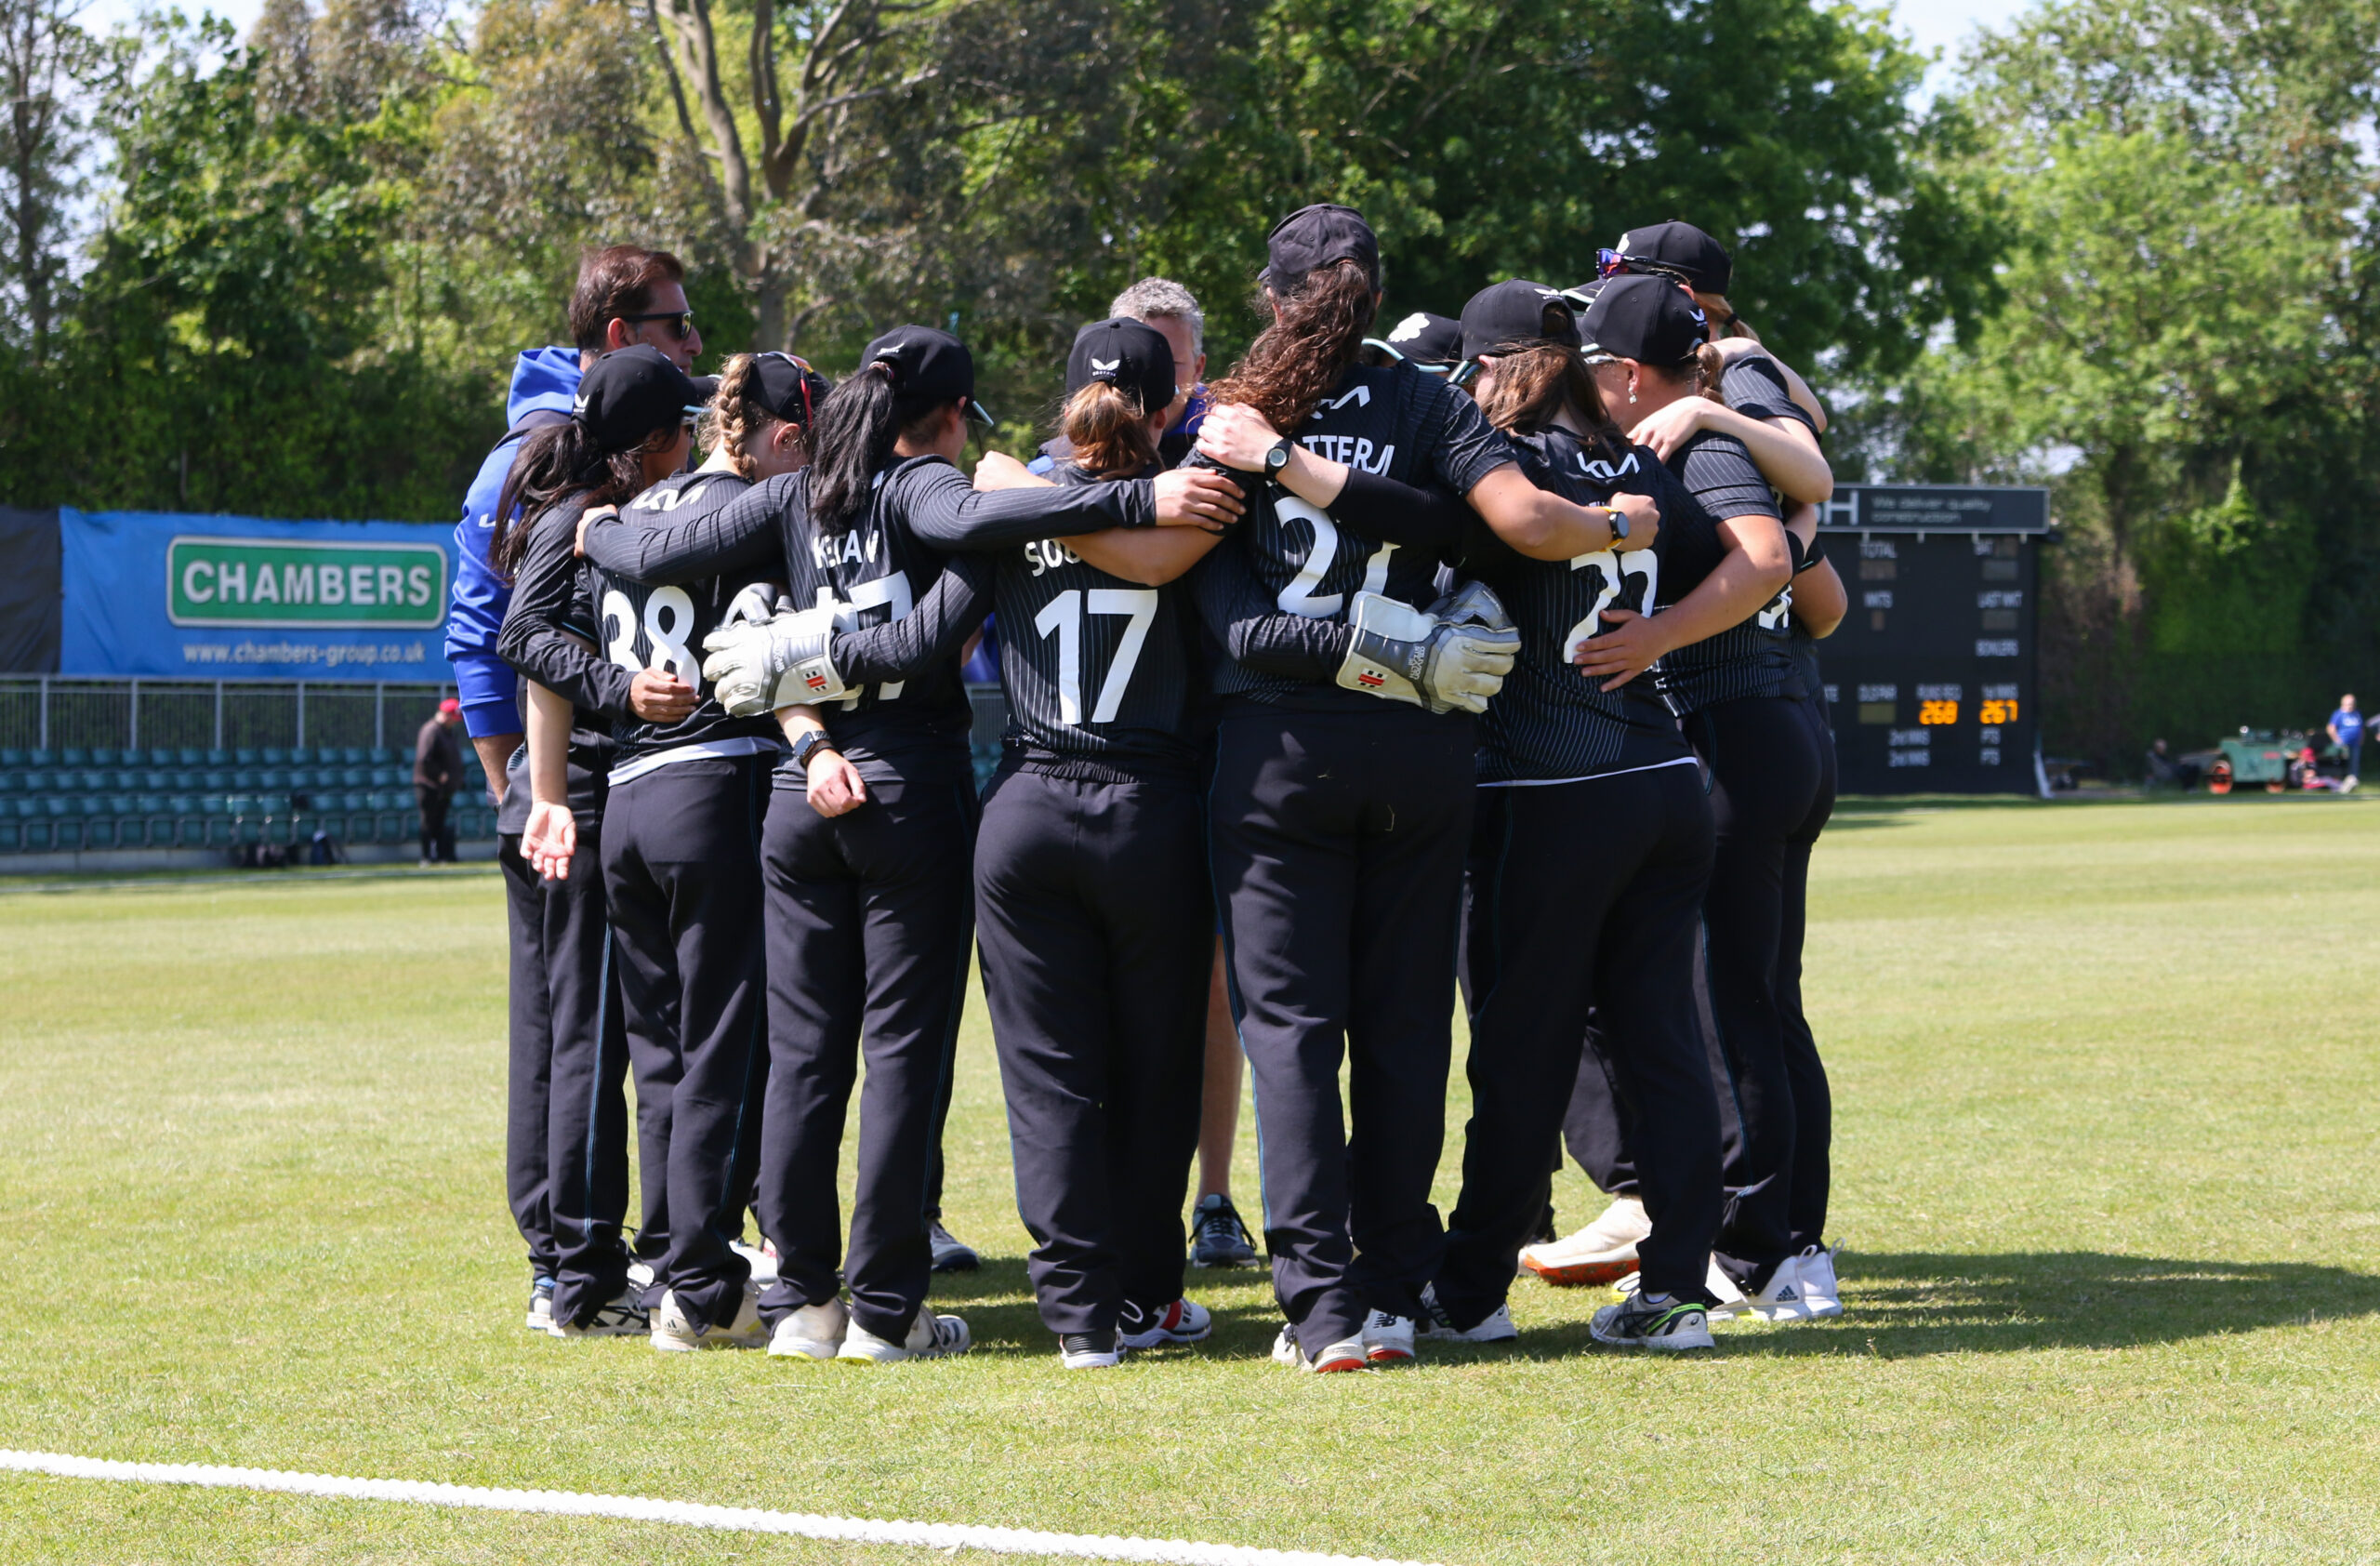 Surrey v Hampshire: Women’s County One-Day – Live Updates